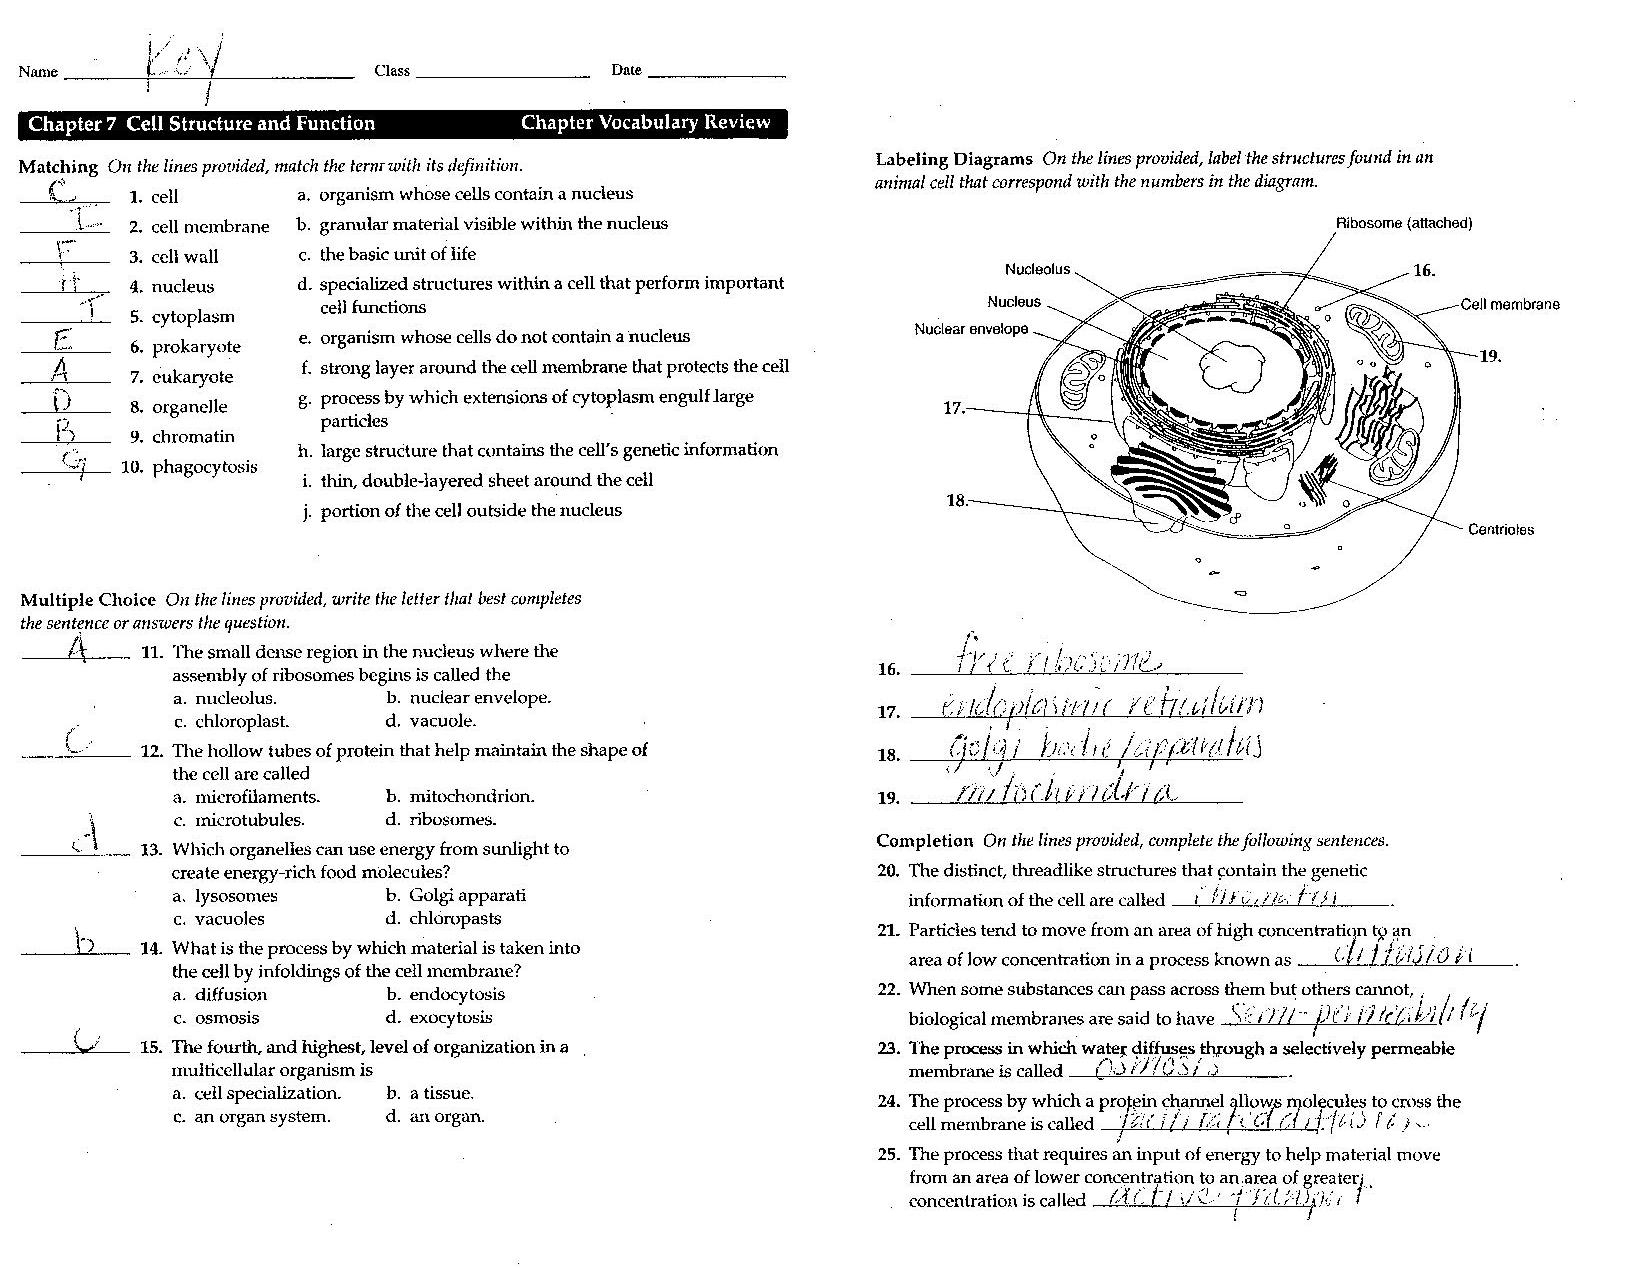 Cells Worksheet Answers The Best Worksheets Image Collection